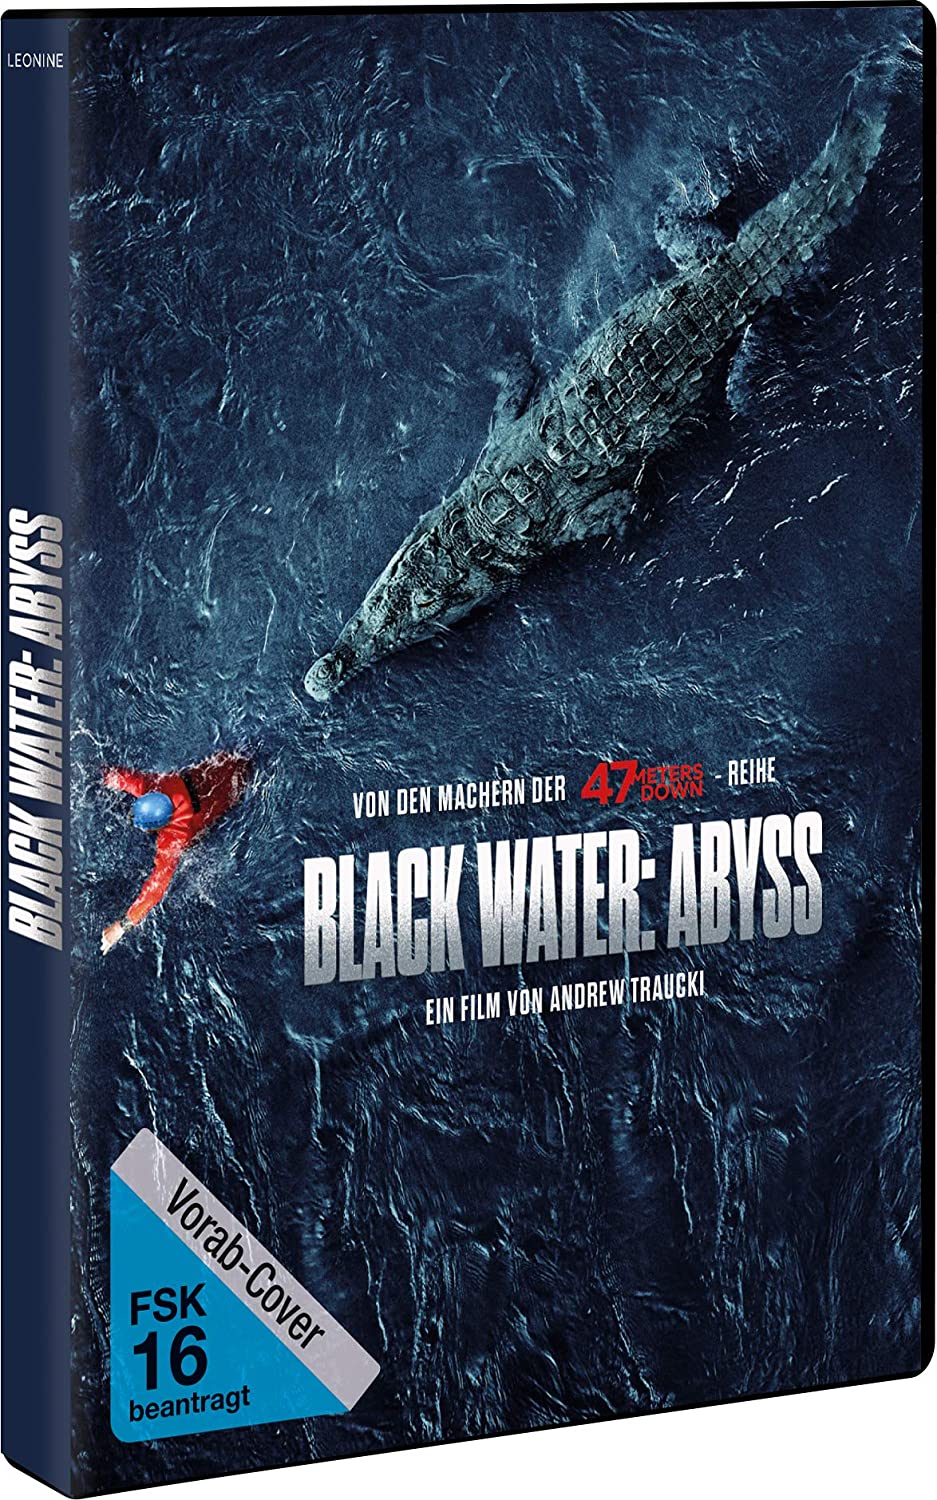 Black Water Abyss DVD Vorabcover